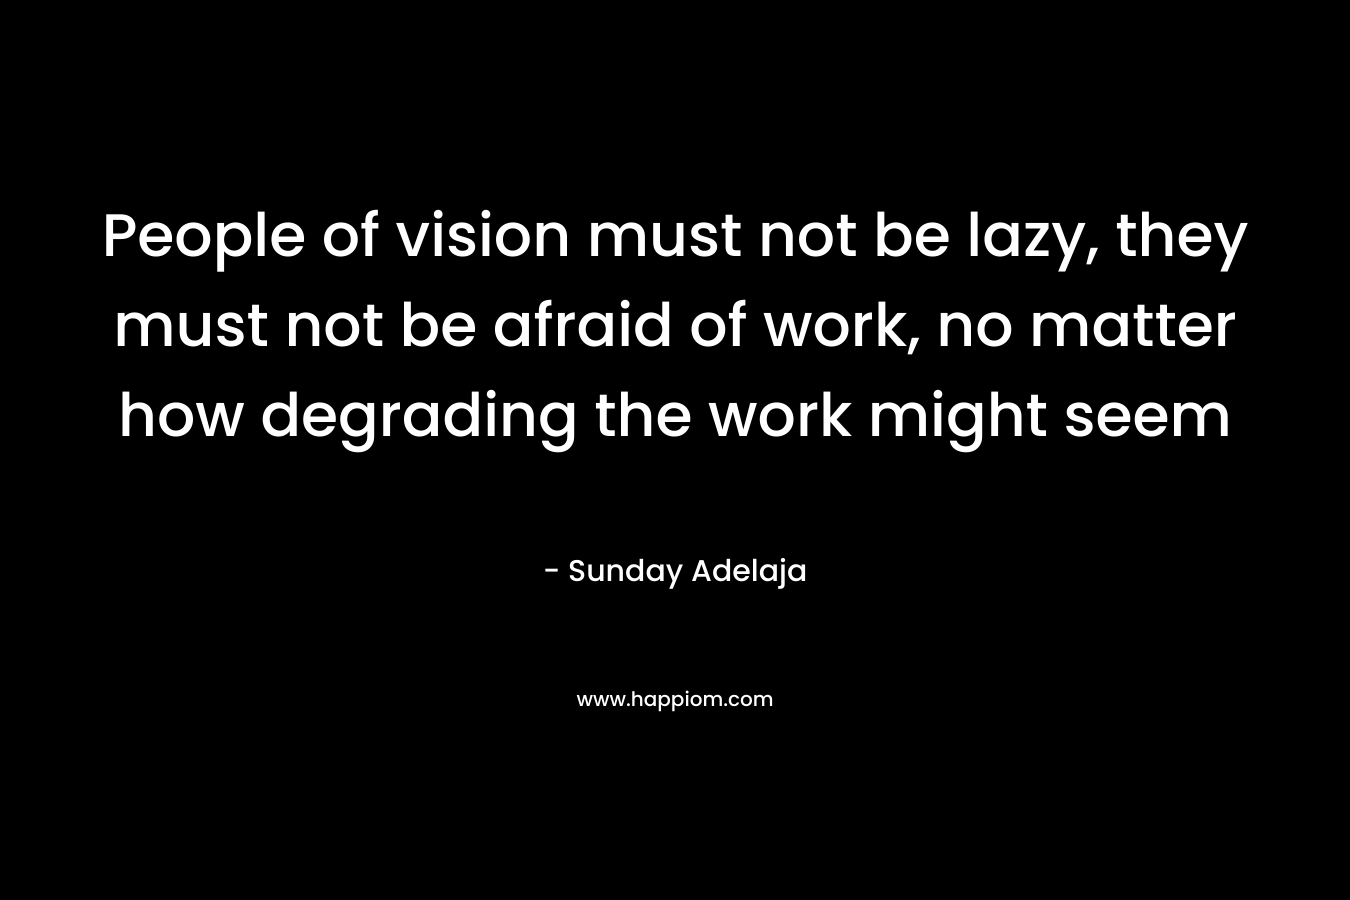 People of vision must not be lazy, they must not be afraid of work, no matter how degrading the work might seem